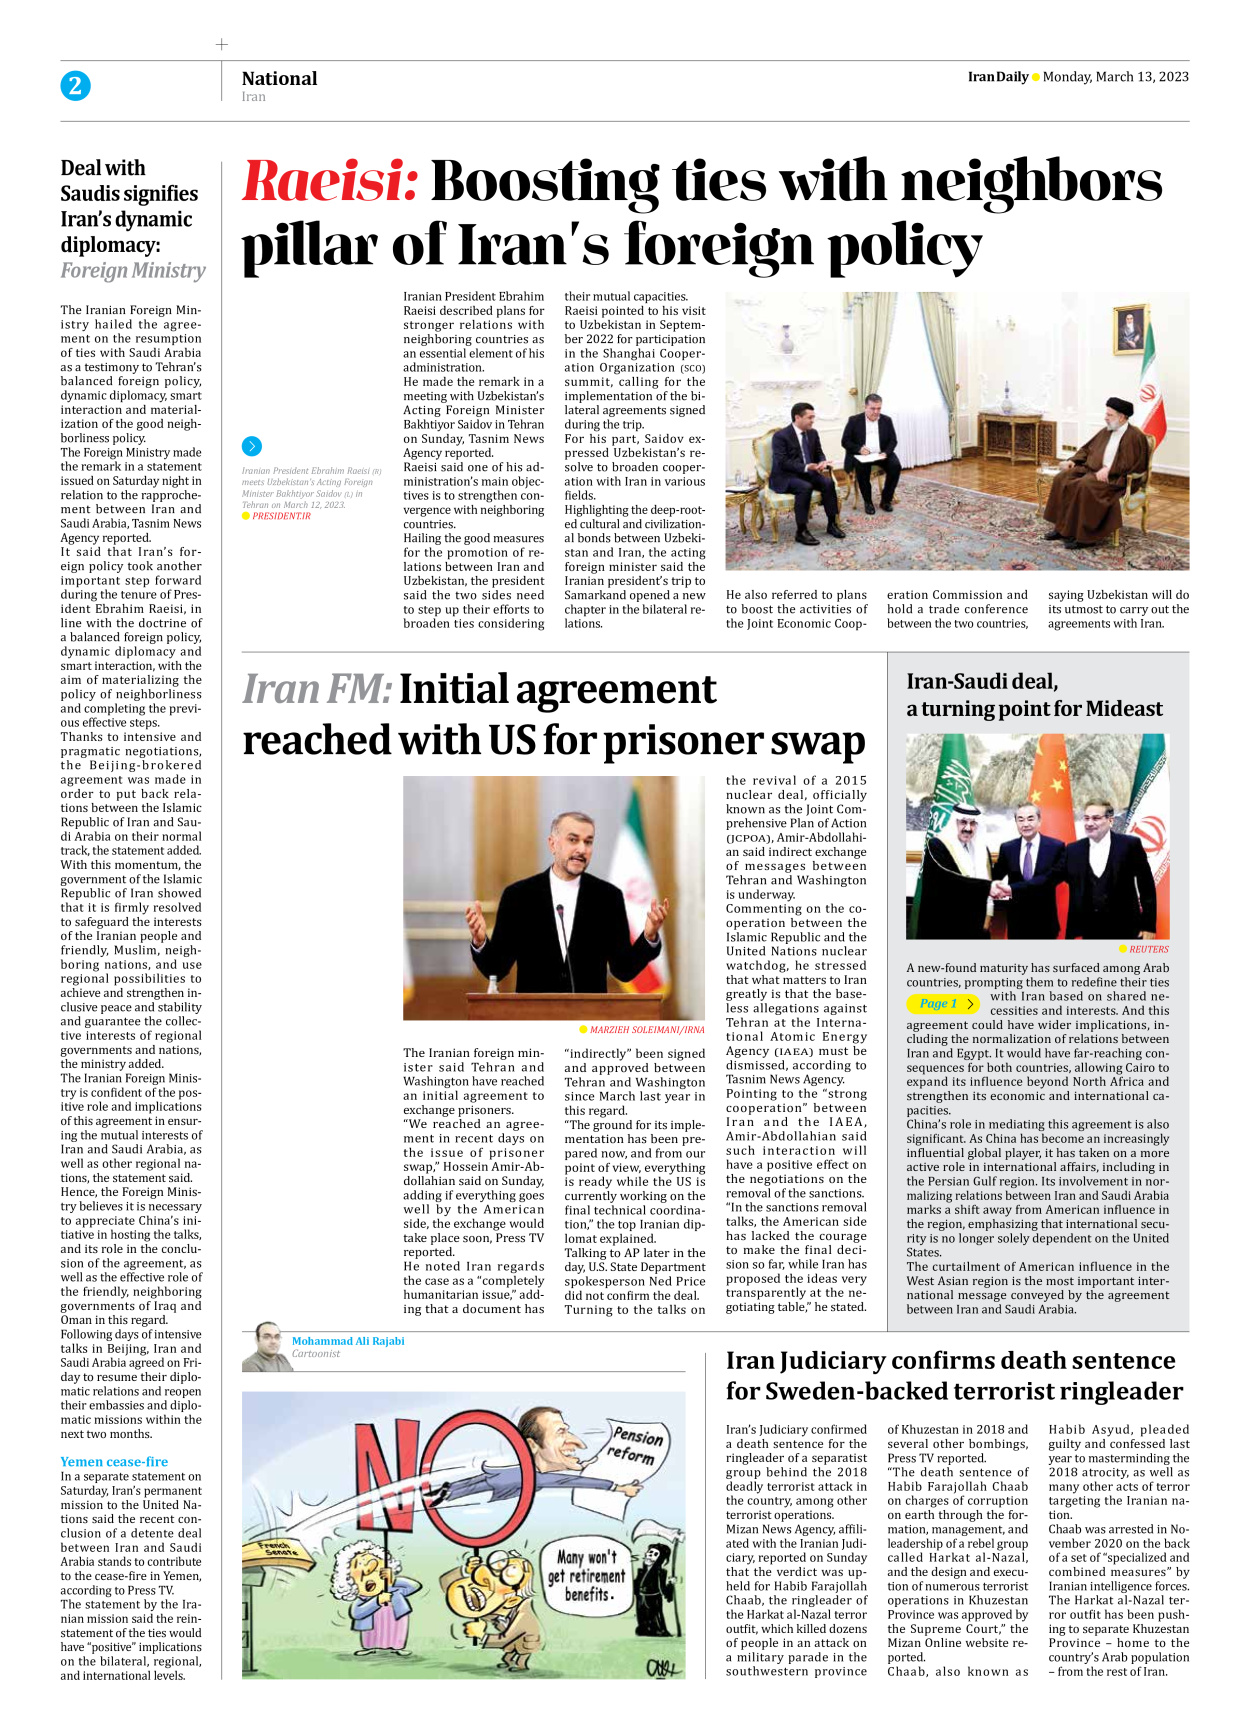 Iran Daily - Number Seven Thousand Two Hundred and Fifty Six - 13 March 2023 - Page 2